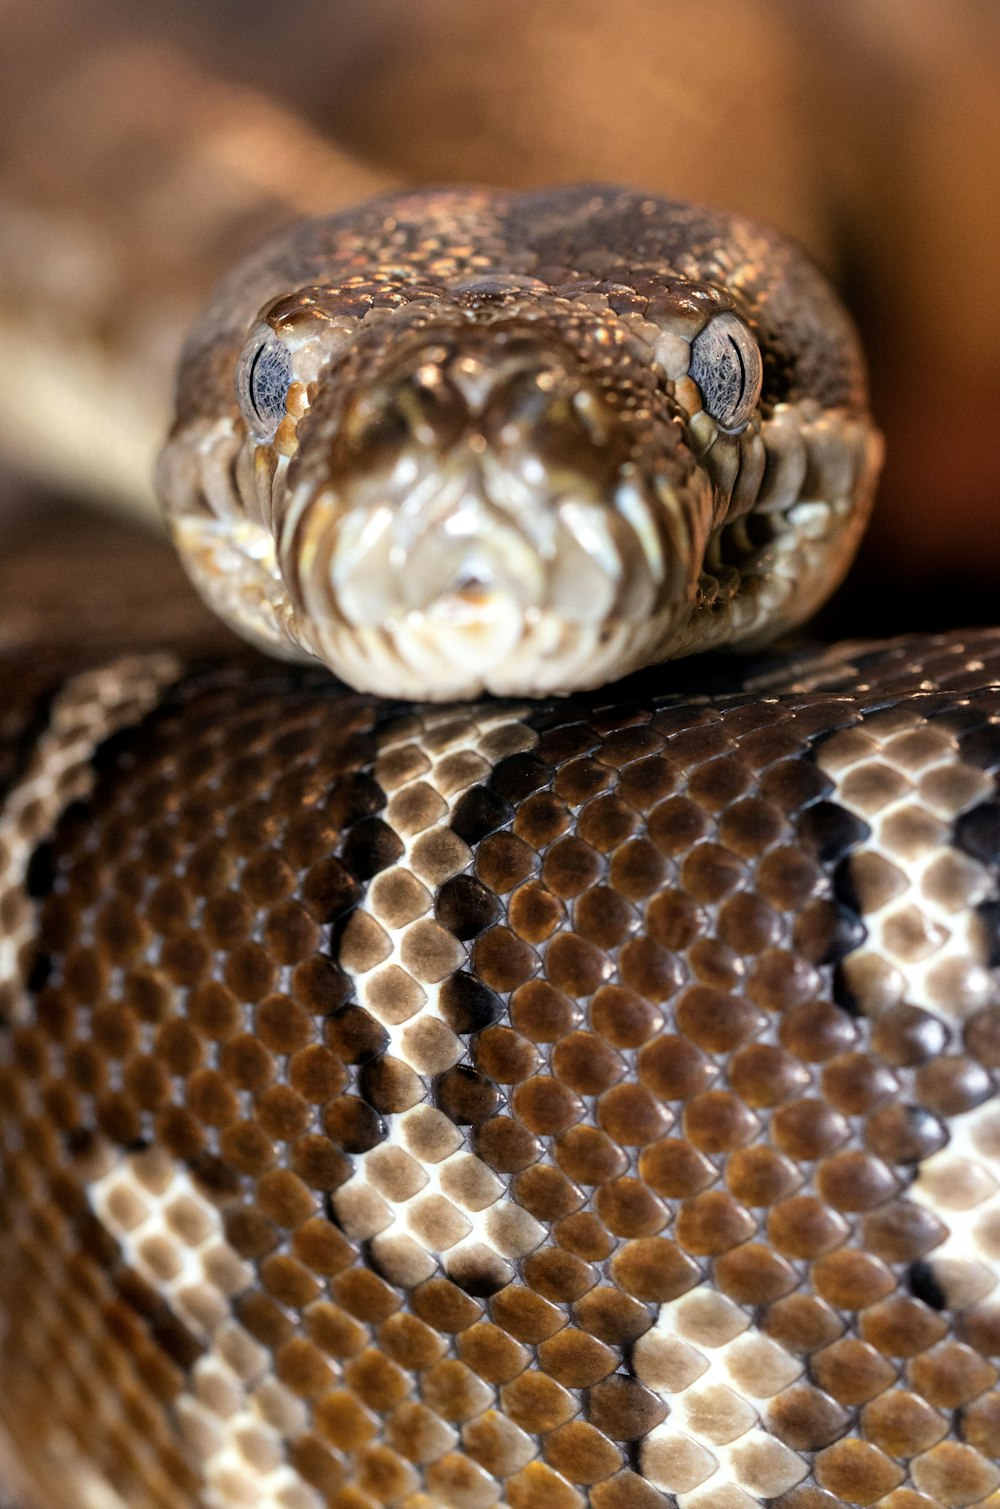 brown and white snake in close up photography